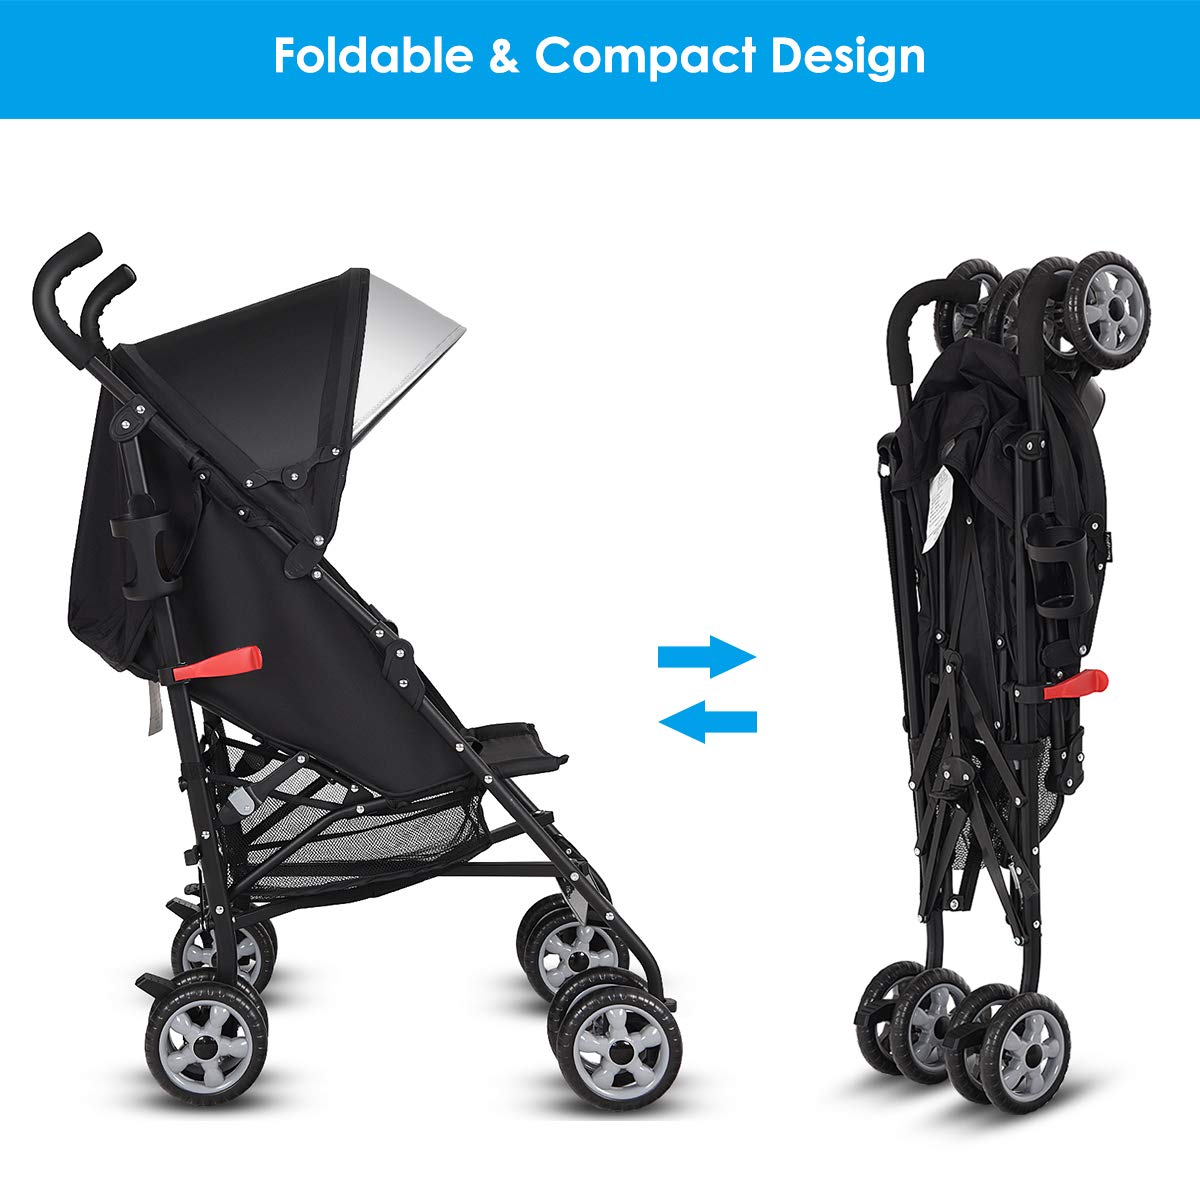 Folding & Compact Stroller: Portable baby stroller can be easily folded into a compact size for space-saving and storage. And with the buckle, the foldable stroller won’t be spread up for safety. Weights only 12.5 pounds, this infant umbrella stroller is convenient for parents to carry outside or store in truck for day trip.